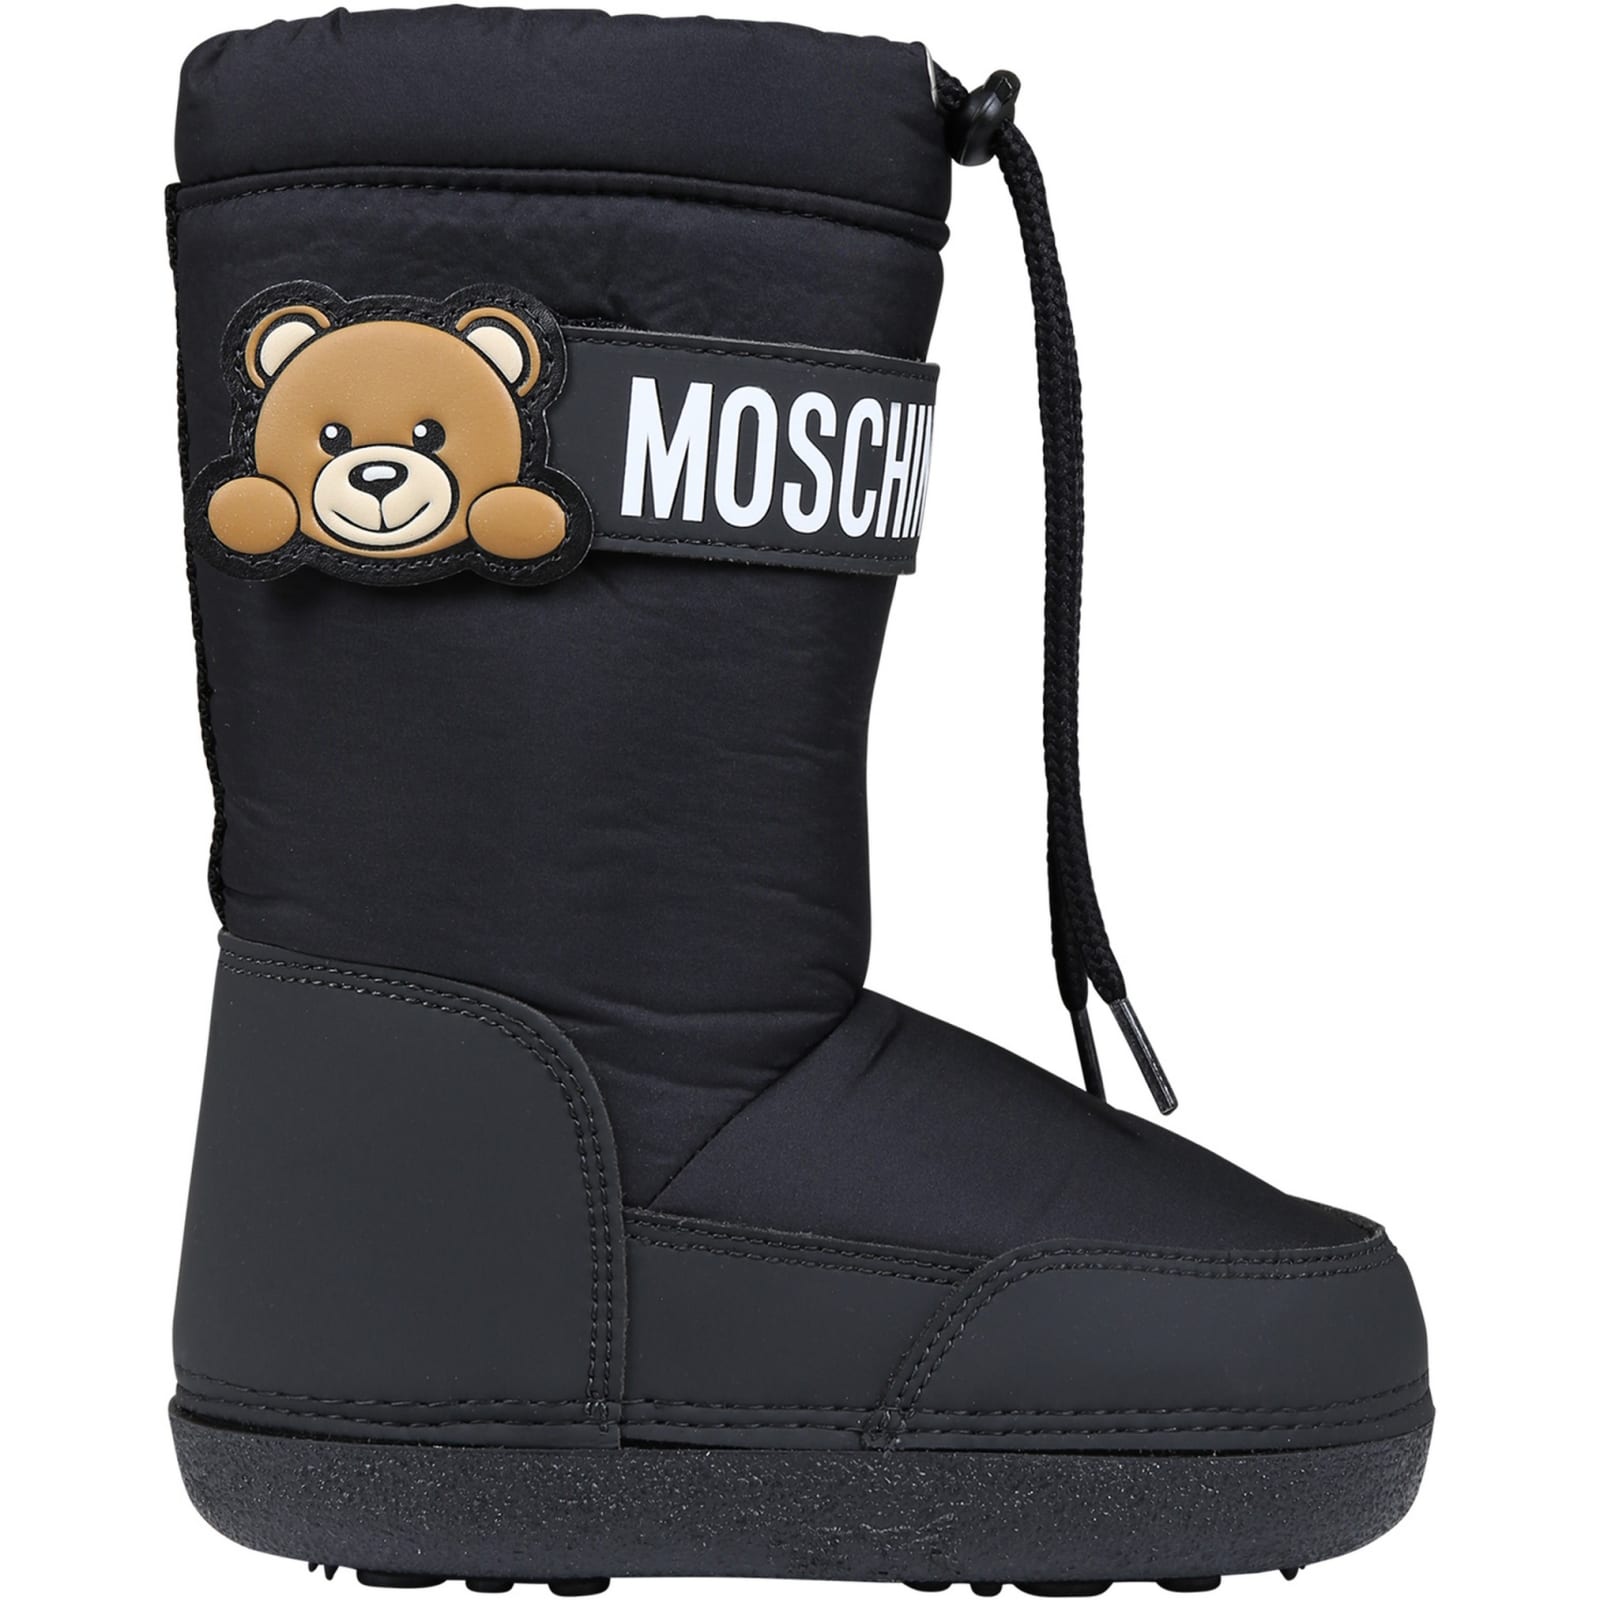 Moschino Balck Boots For Girl With Teddy Bear And Logo